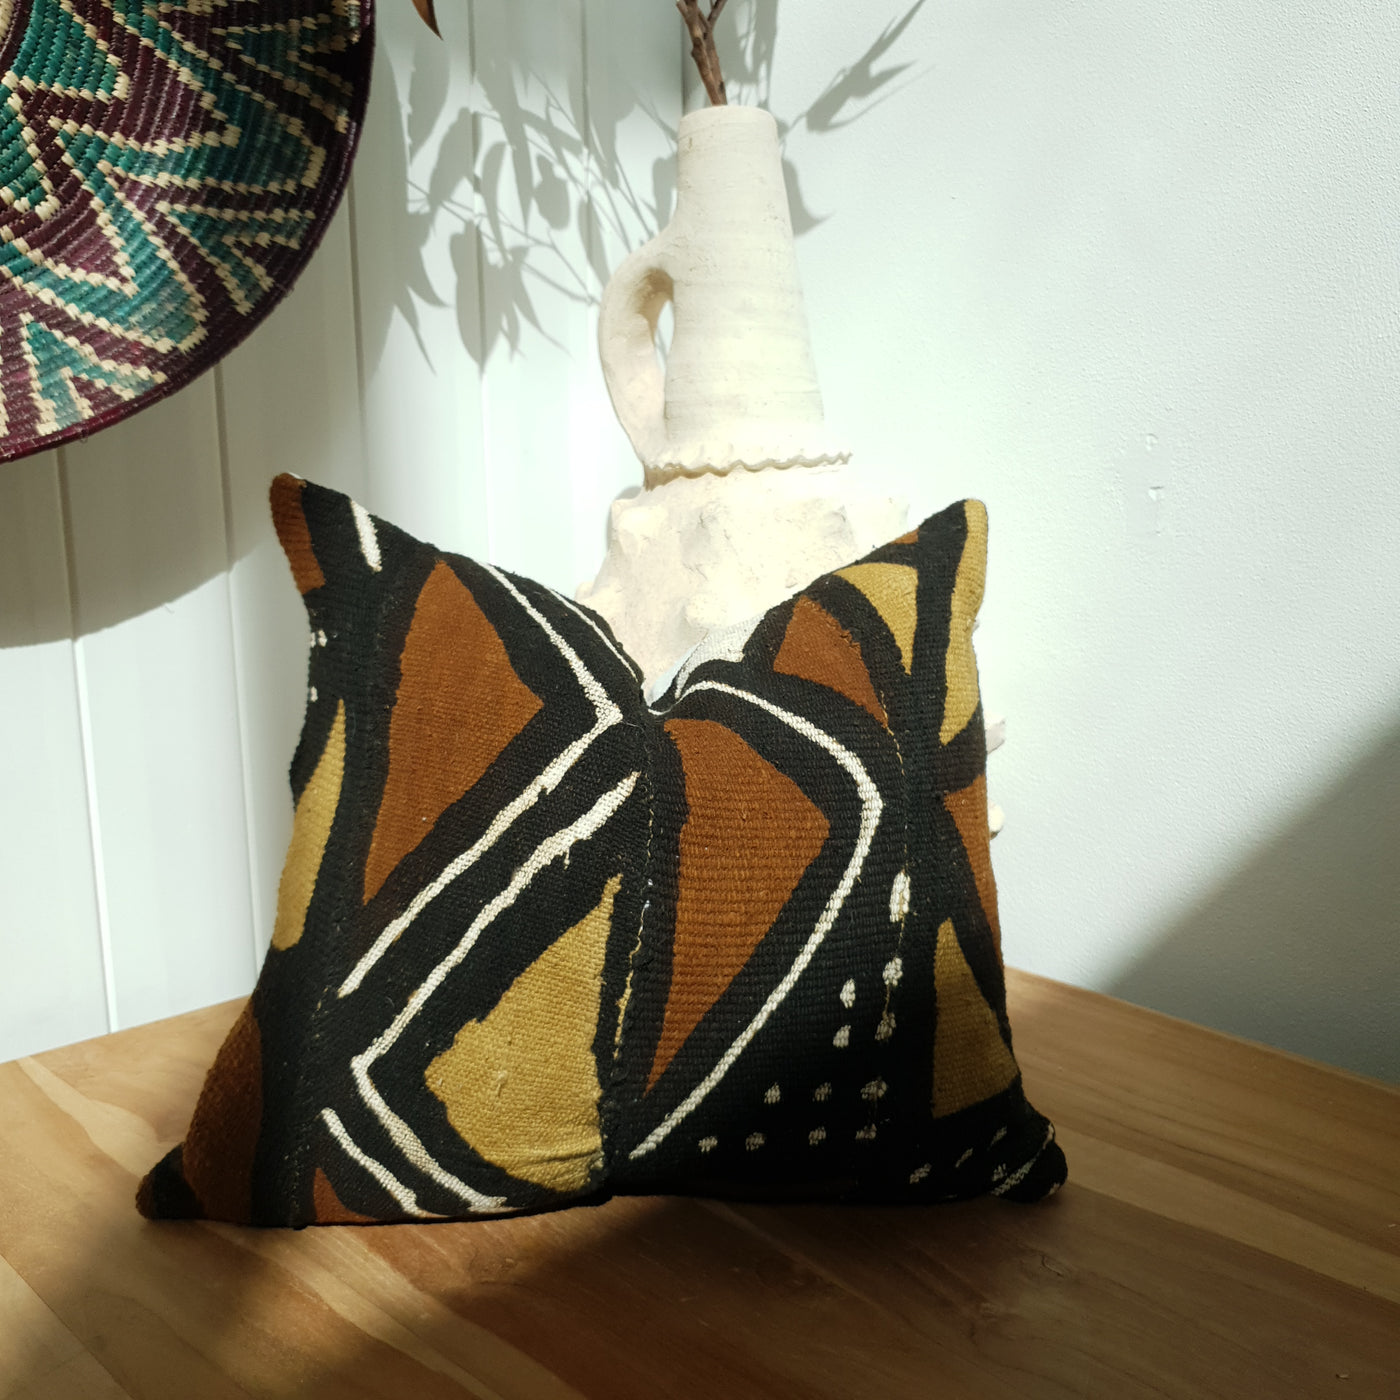 mudcloth cushion in the sunlight